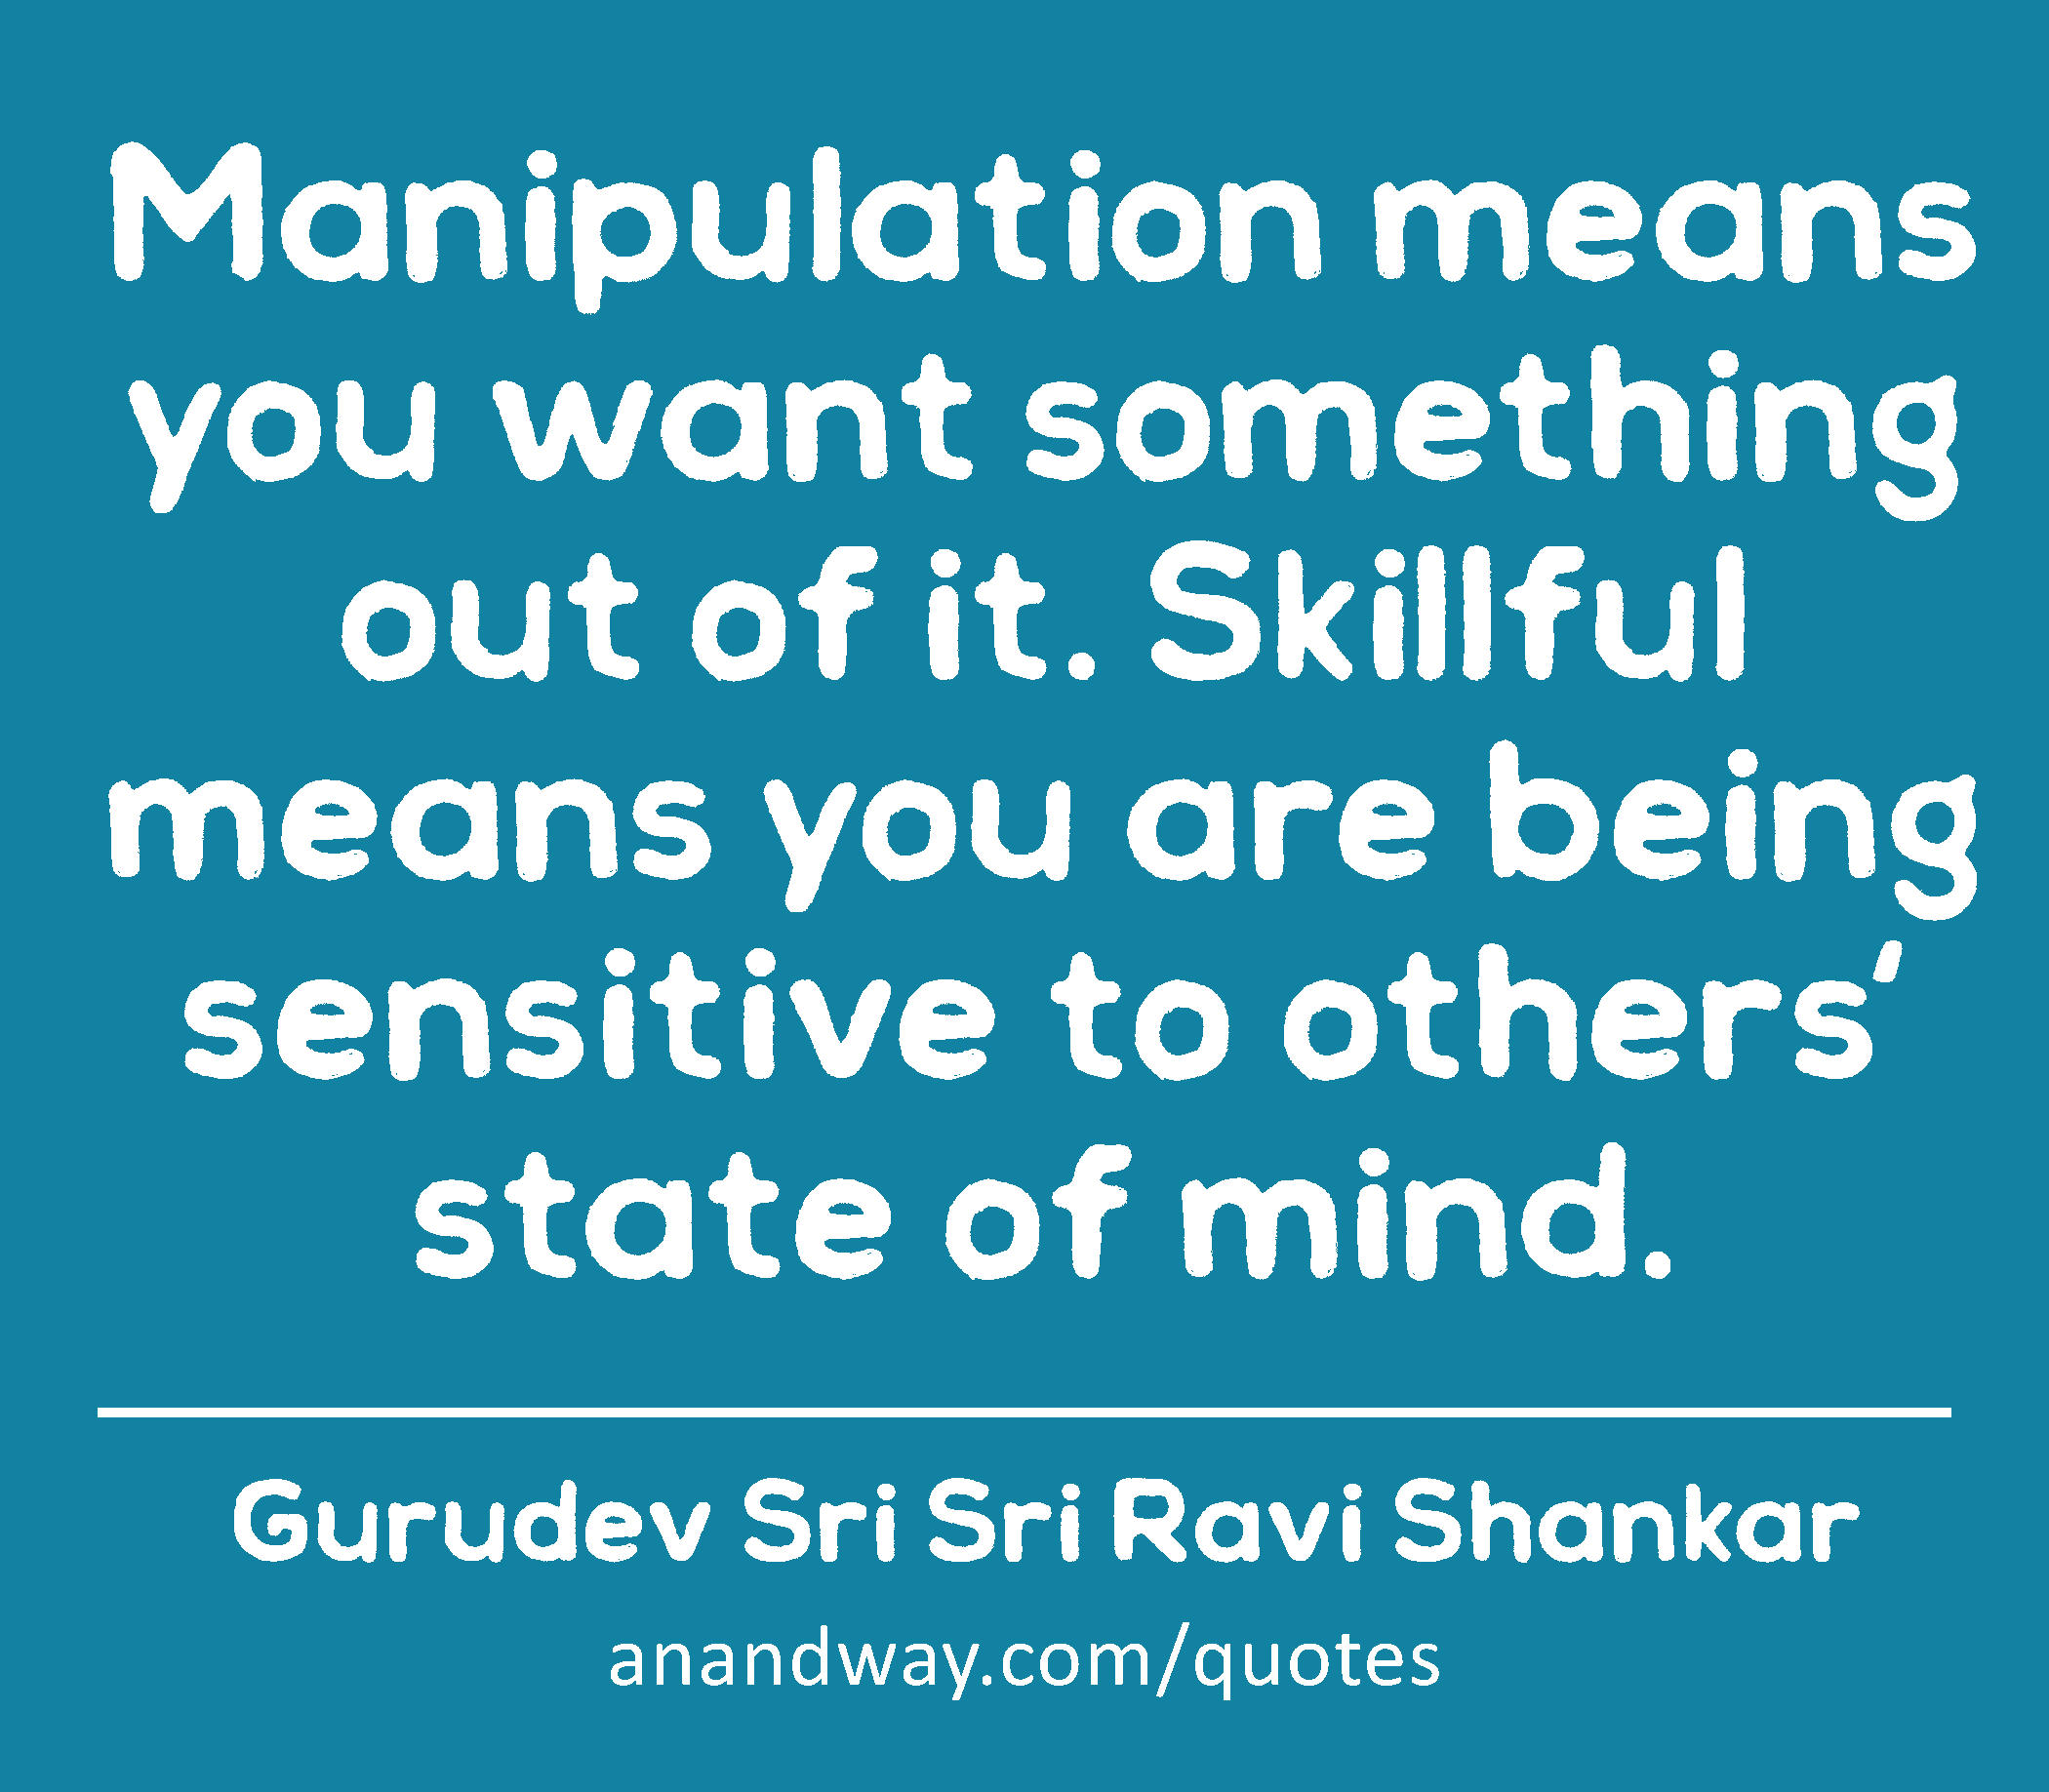 Manipulation means you want something out of it. Skillful means you are being sensitive to others'
 -Gurudev Sri Sri Ravi Shankar